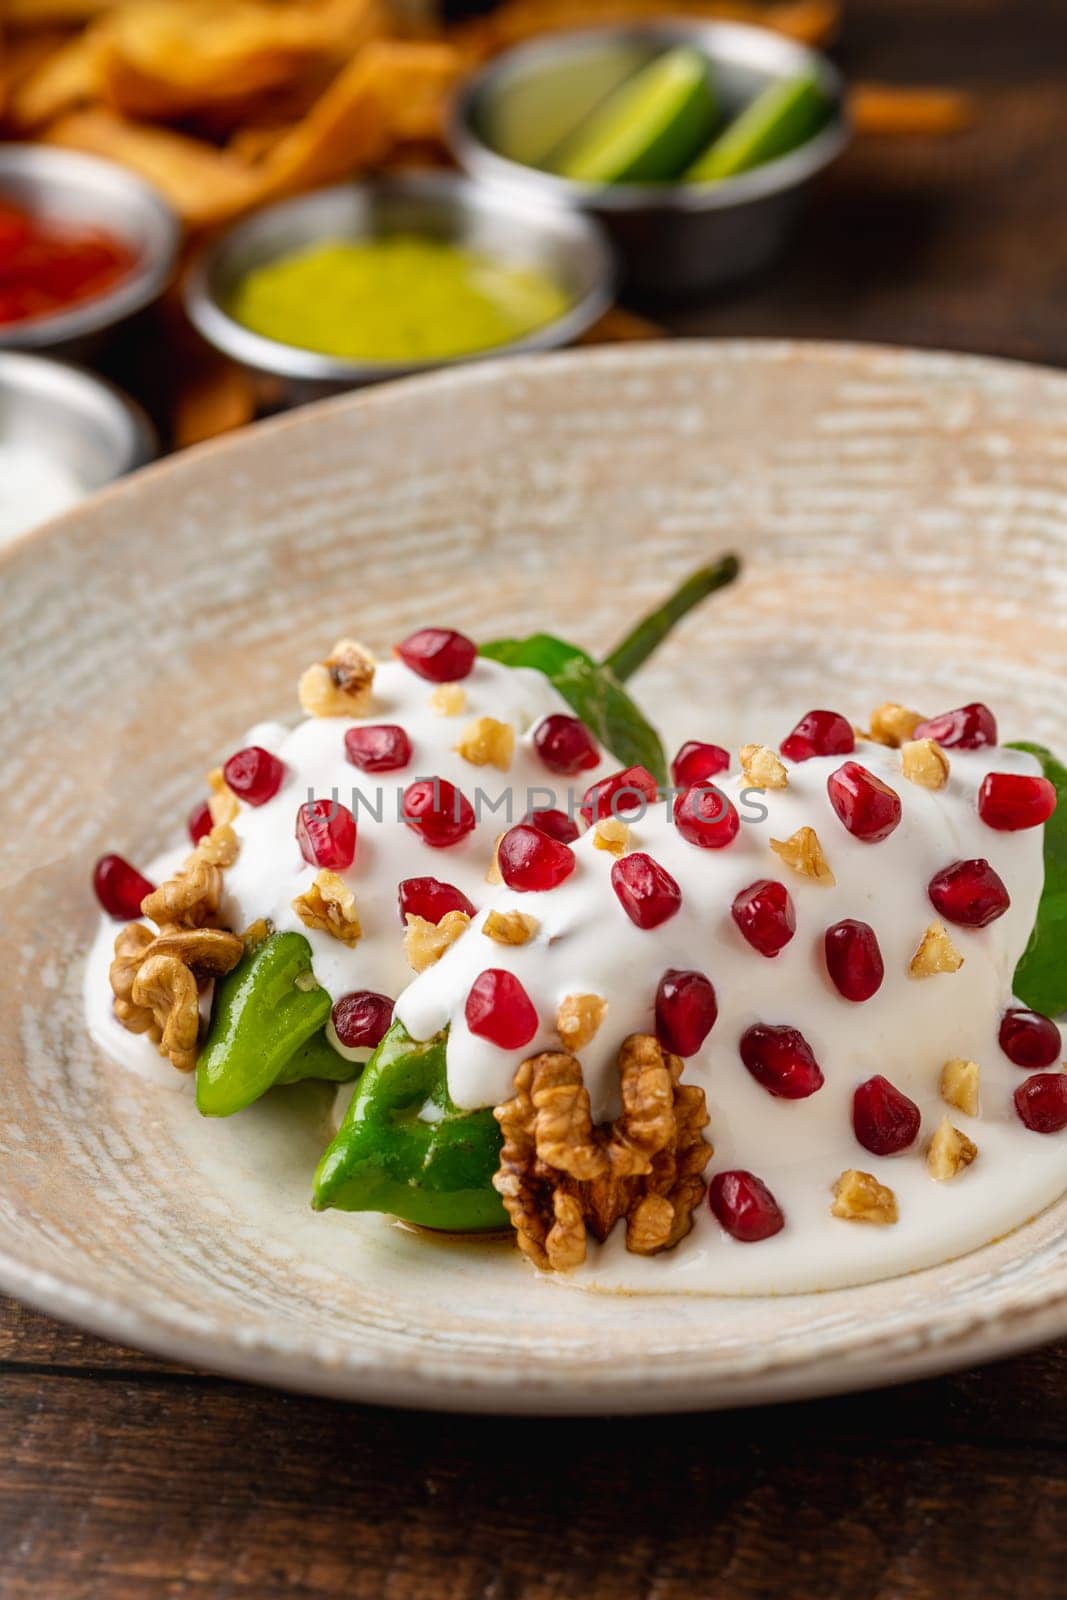 Chiles en Nogada, a traditional Mexican dish made with pablano chili stuffed with meat and fruit and garnished with pomegranate seeds and walnuts by Sonat